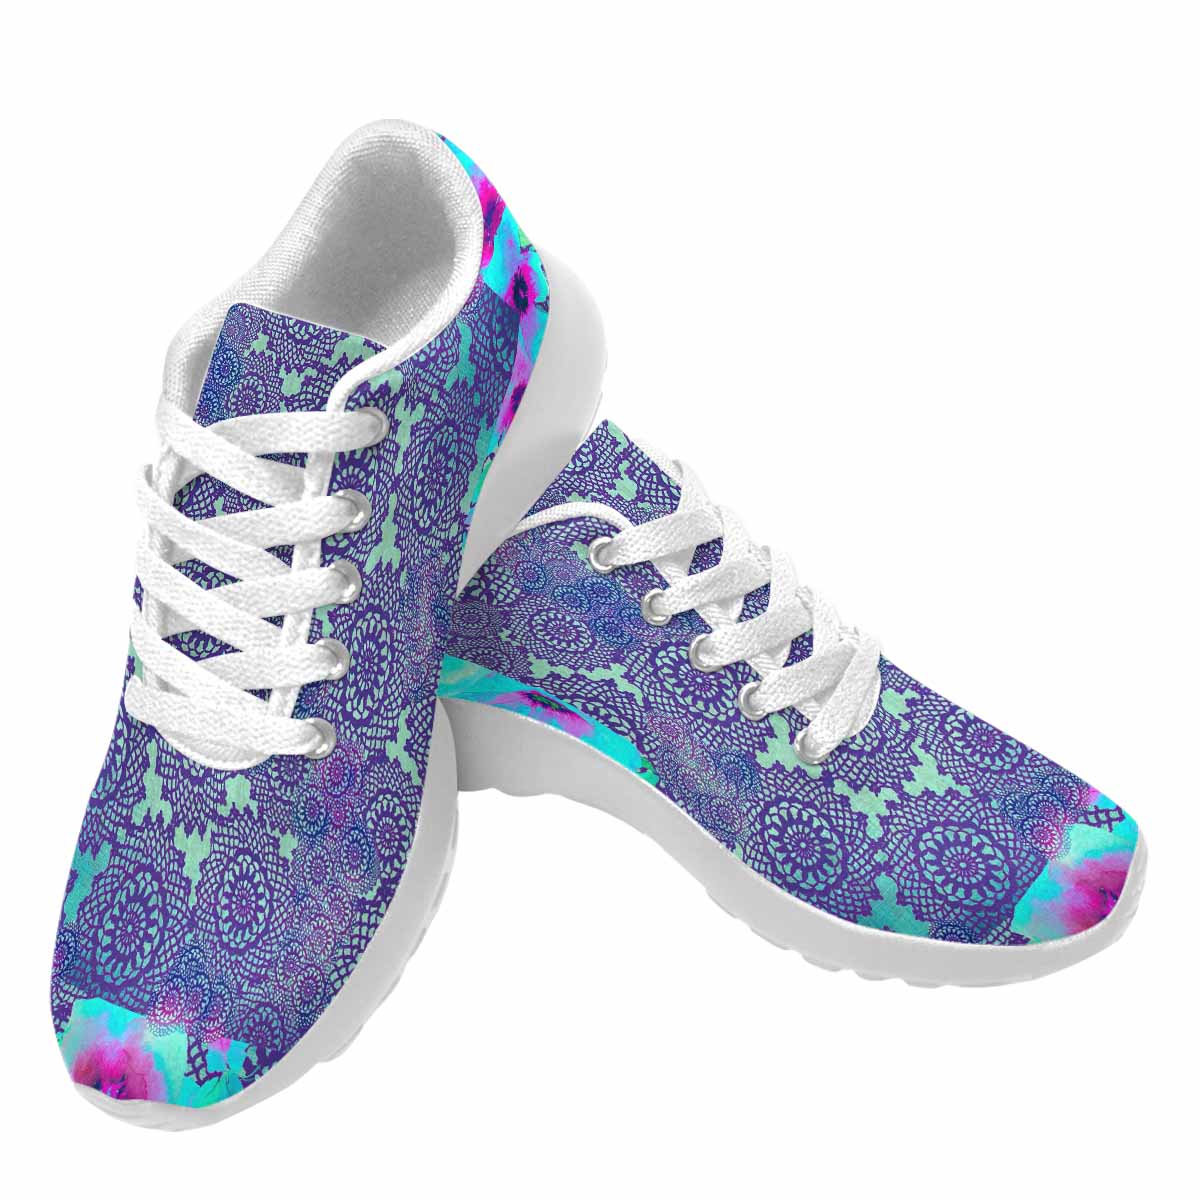 Victorian lace print, womens cute casual or running sneakers, design 14